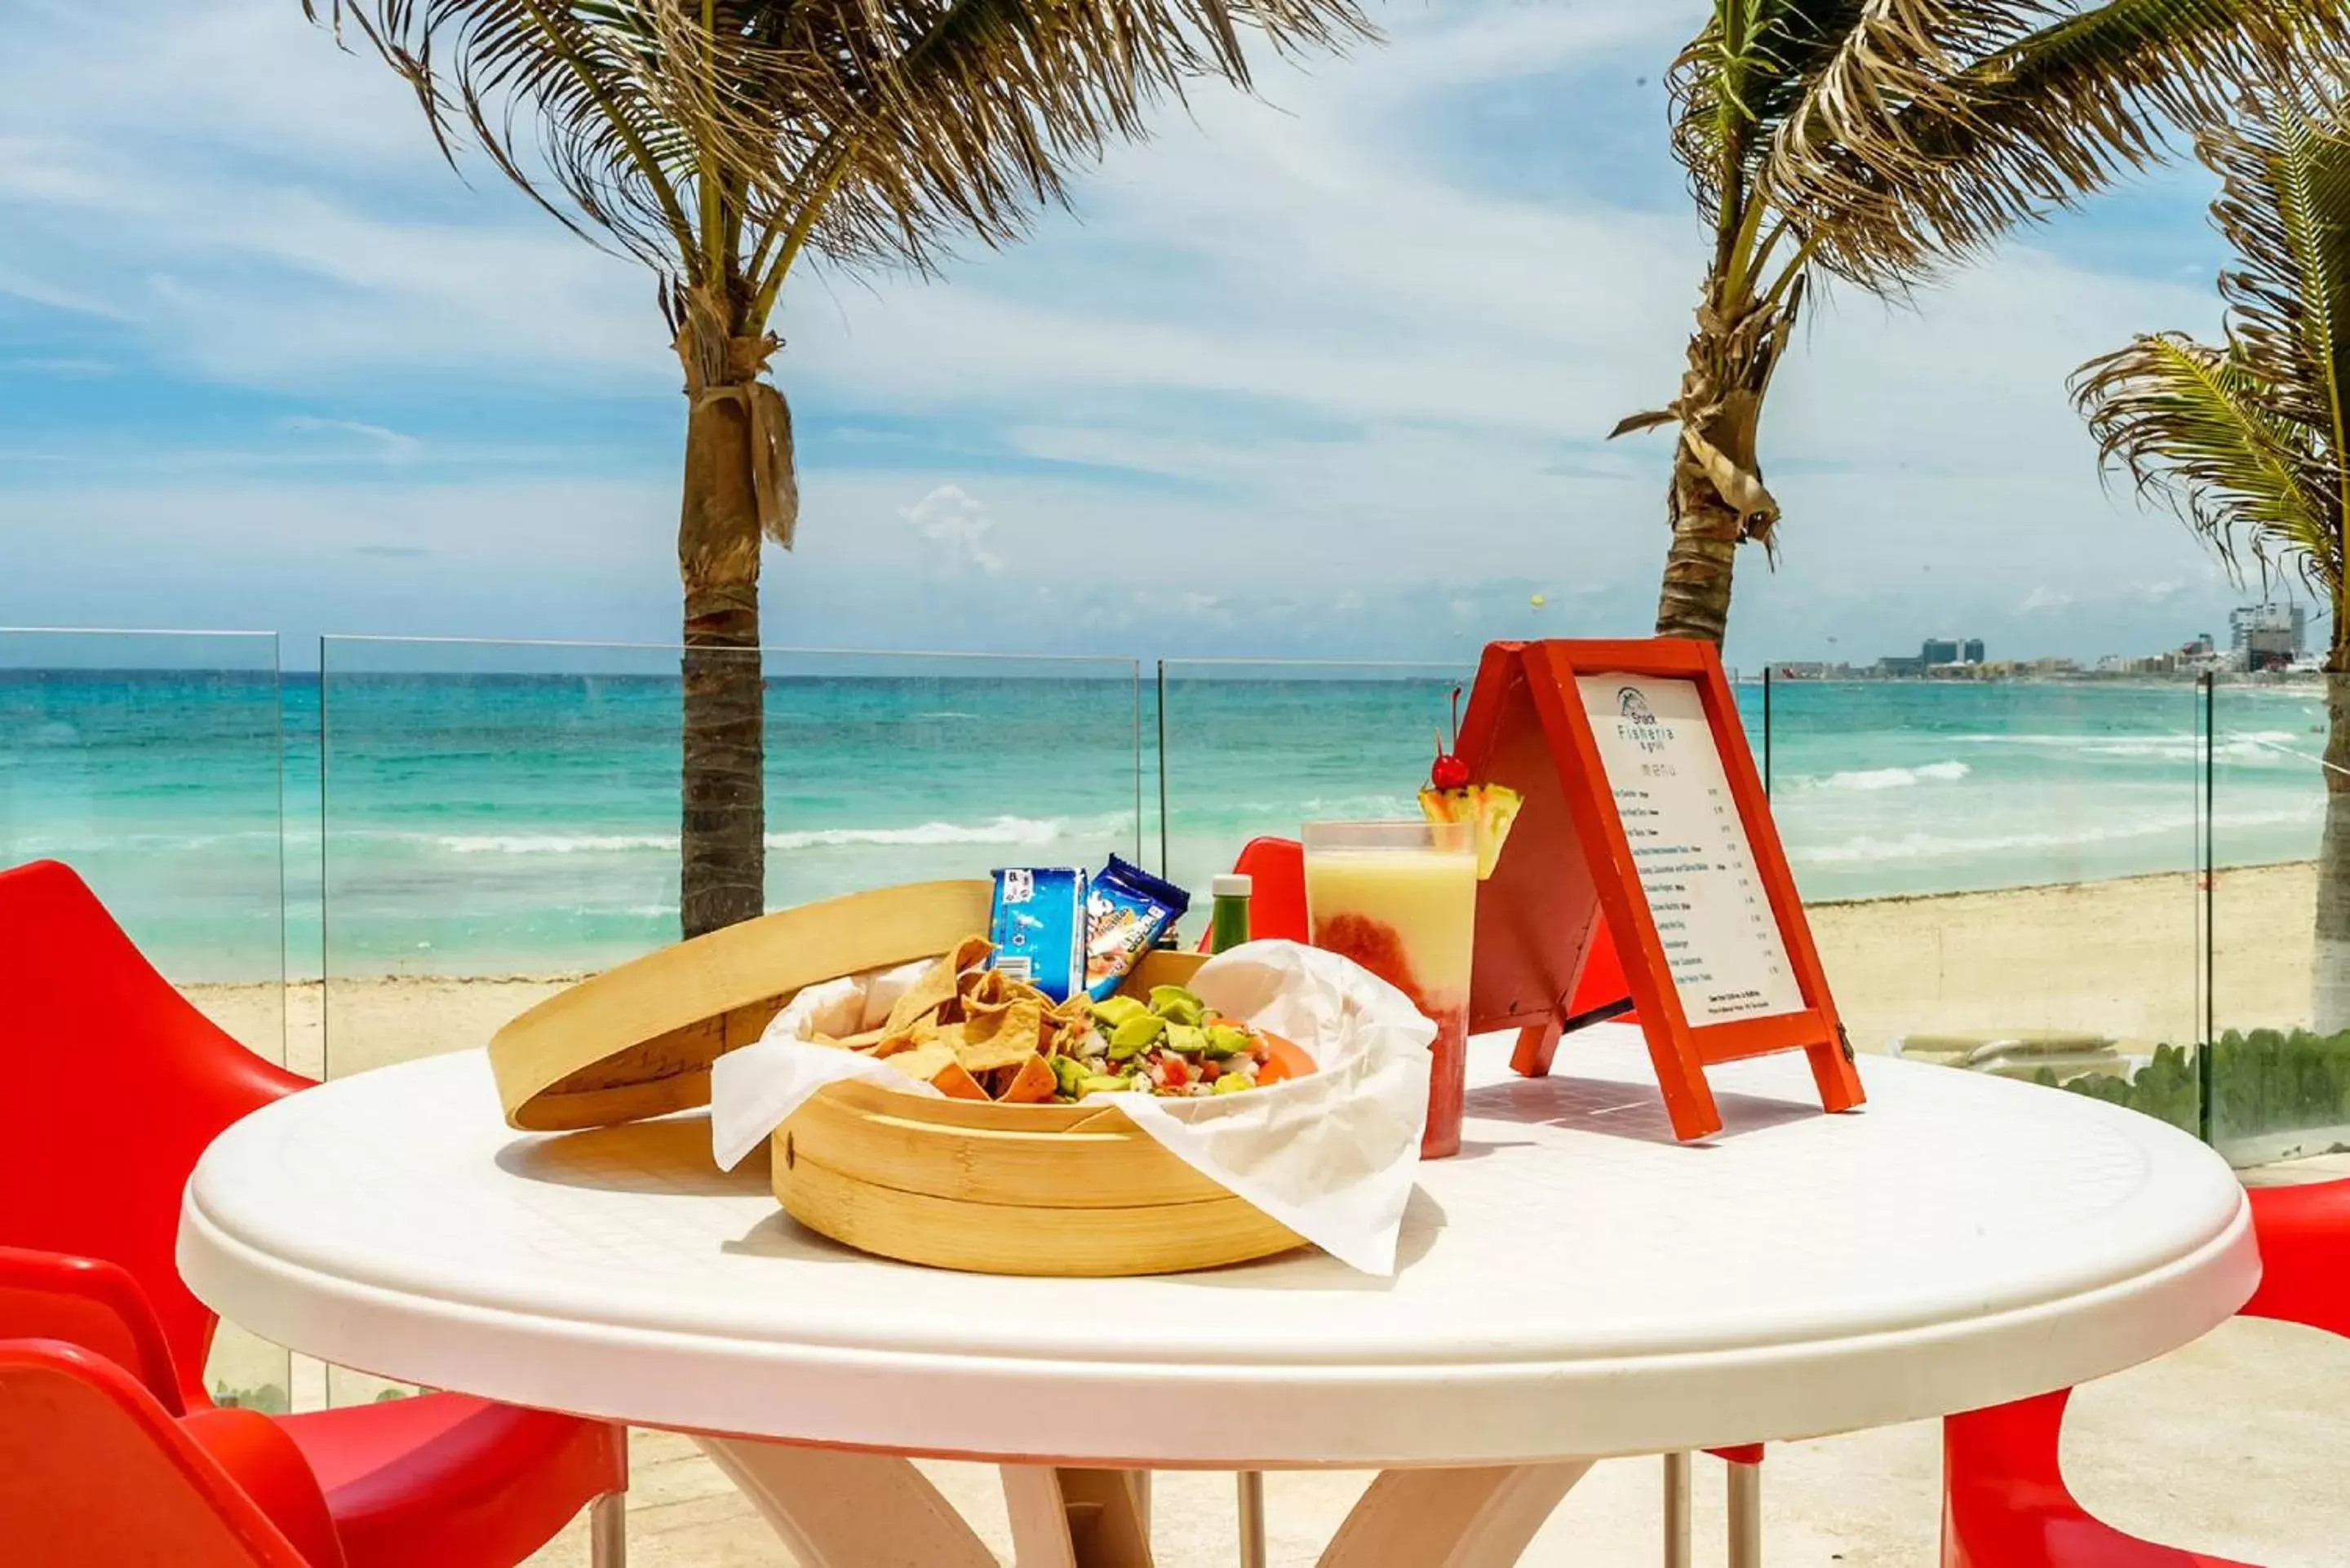 Restaurant/places to eat in Krystal Cancun